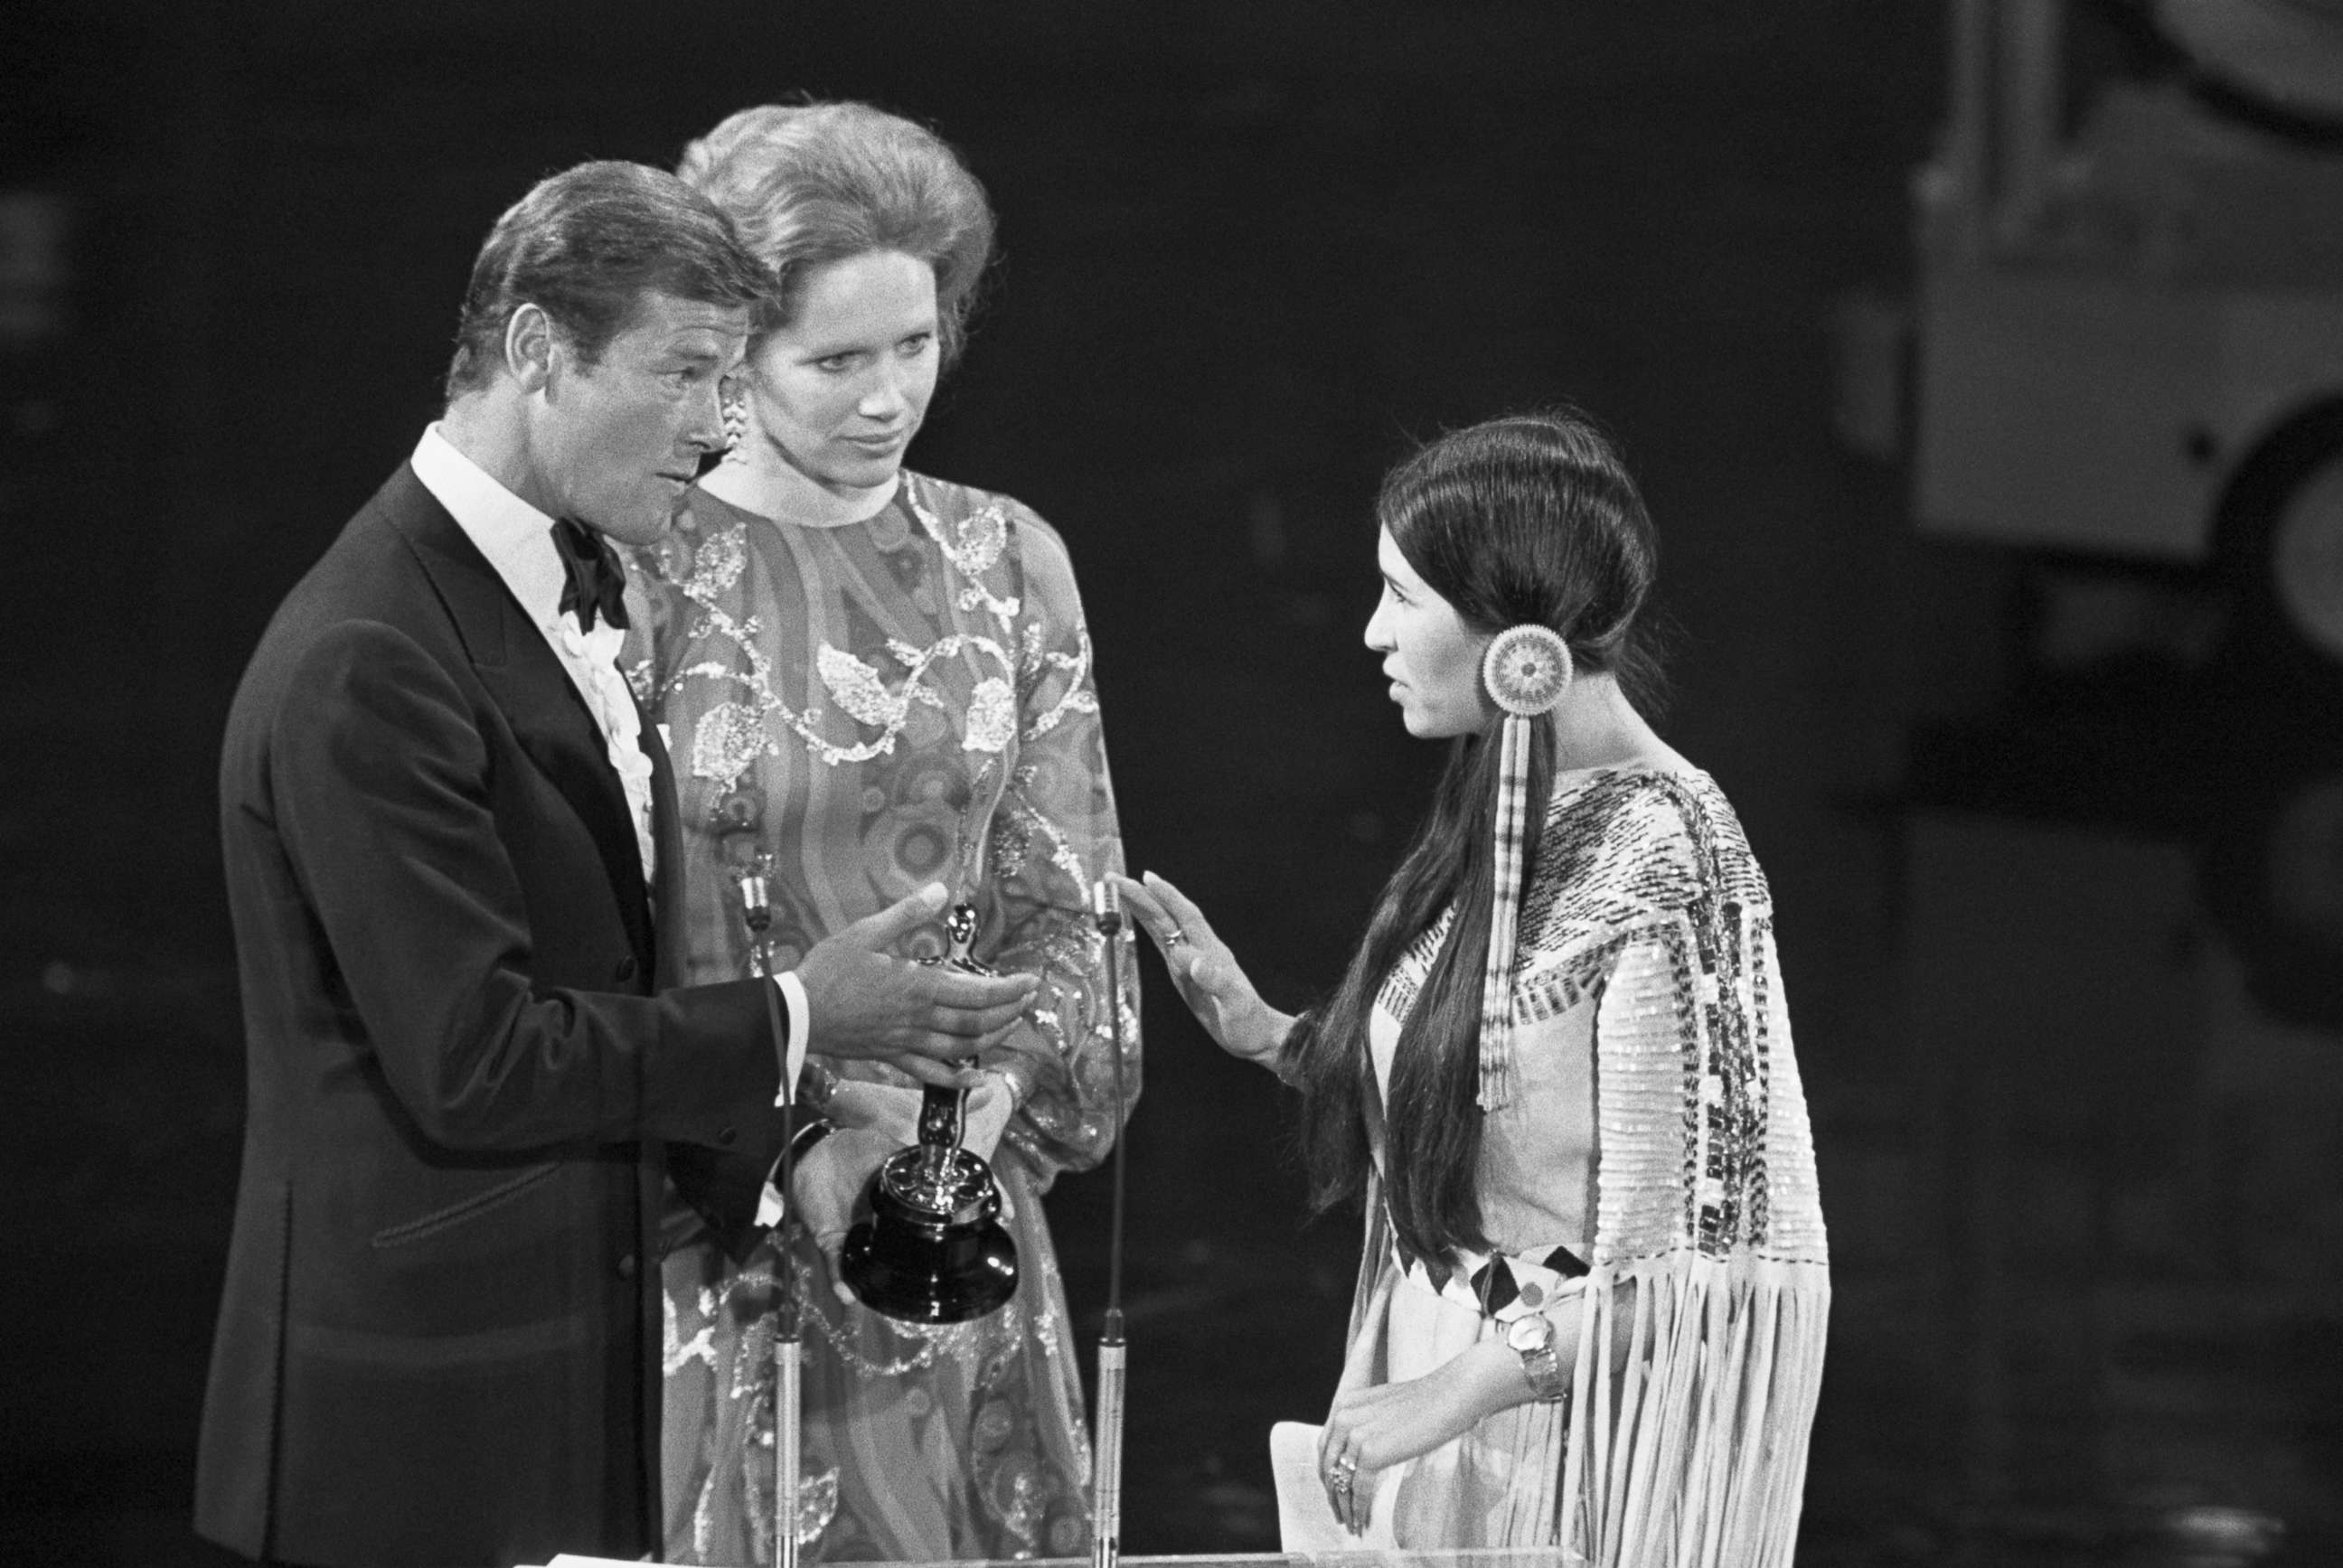 PHOTO: Sacheen Littlefeather refuses the Academy Award for Best Actor on behalf of Marlon Brando at the Oscars ceremony in Los Angeles, March 27, 1973.